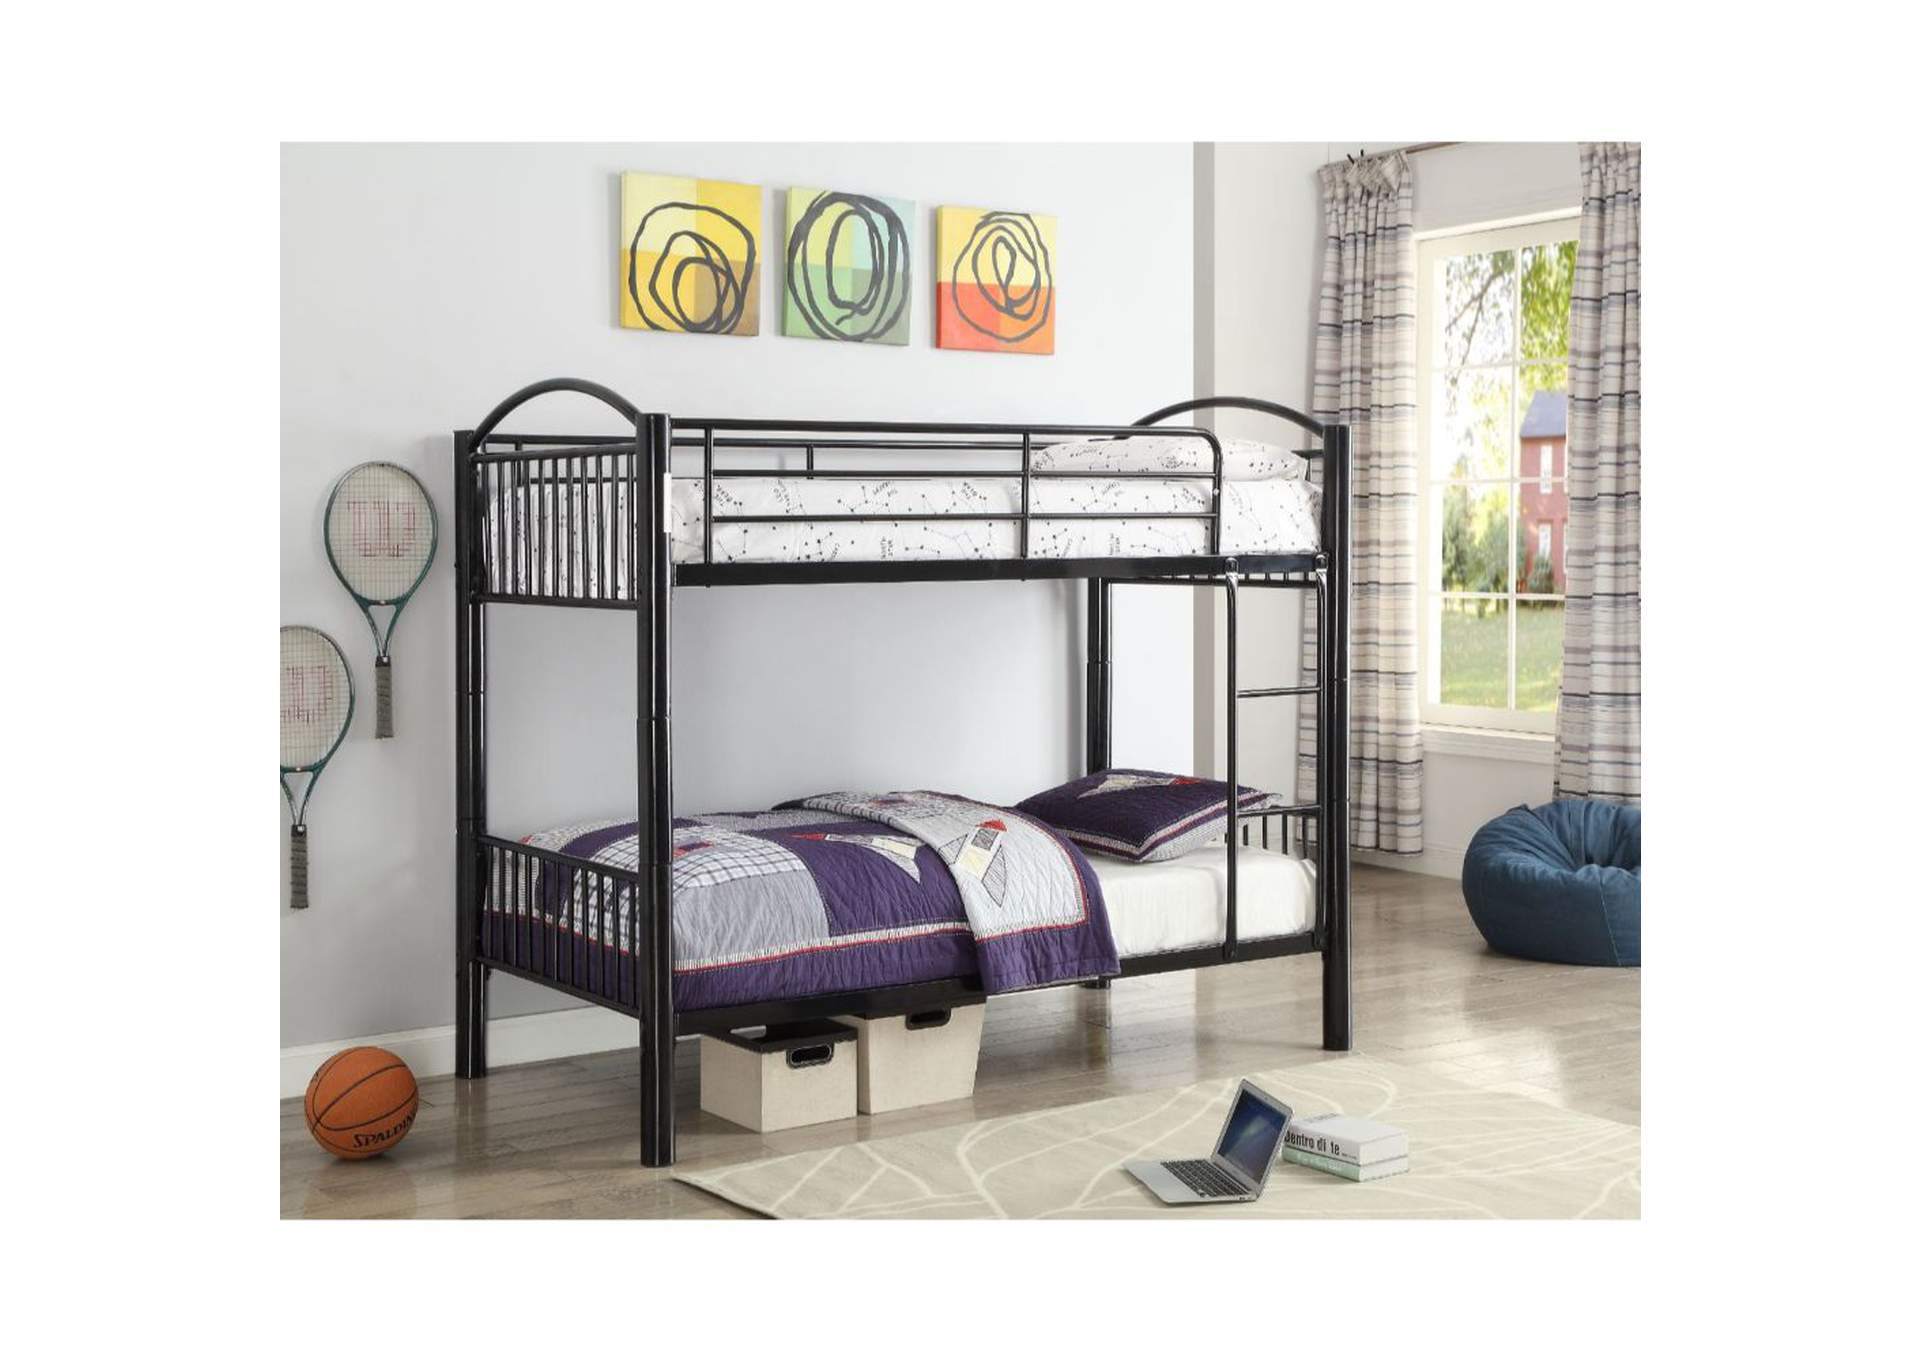 Cayelynn Twin/twin bunk bed,Acme